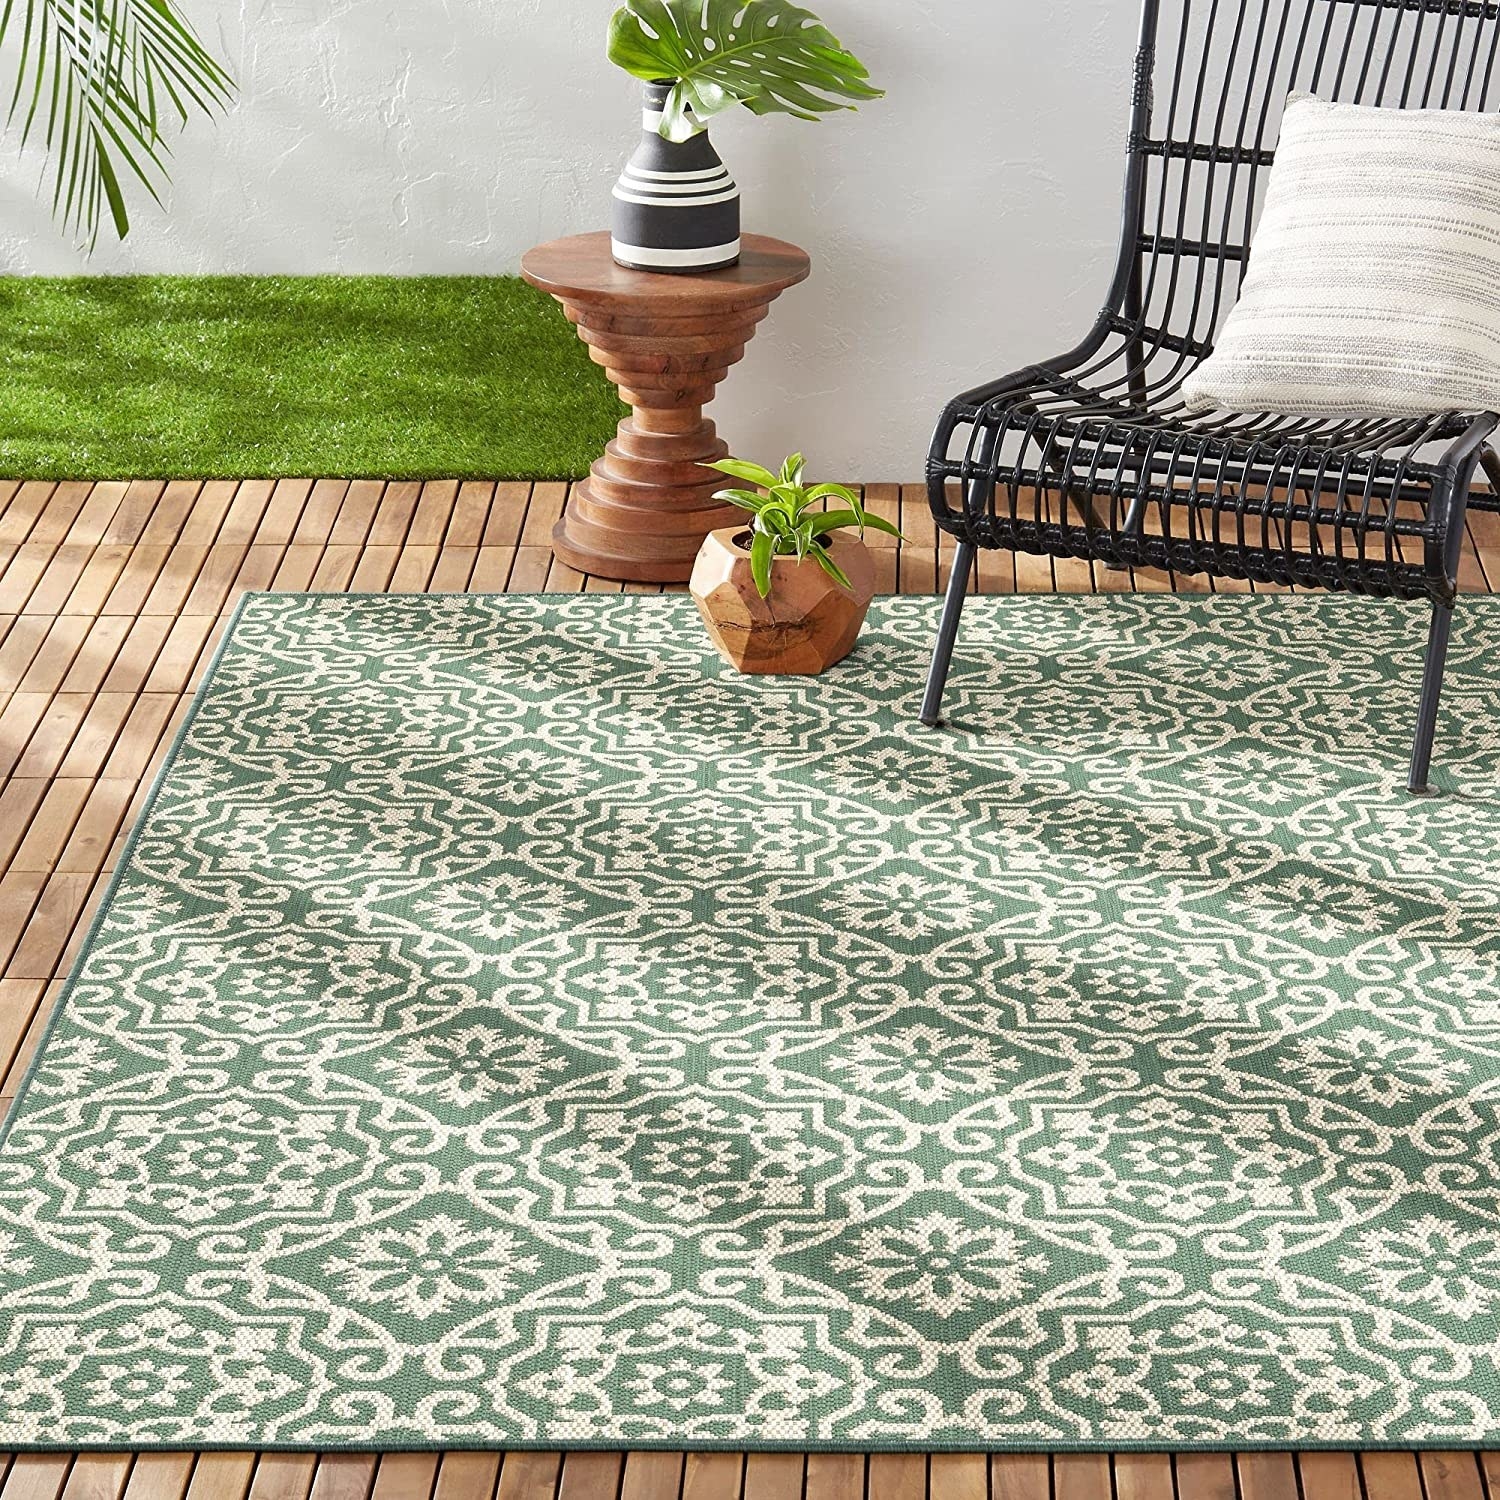 the green and white outdoor rug on a patio